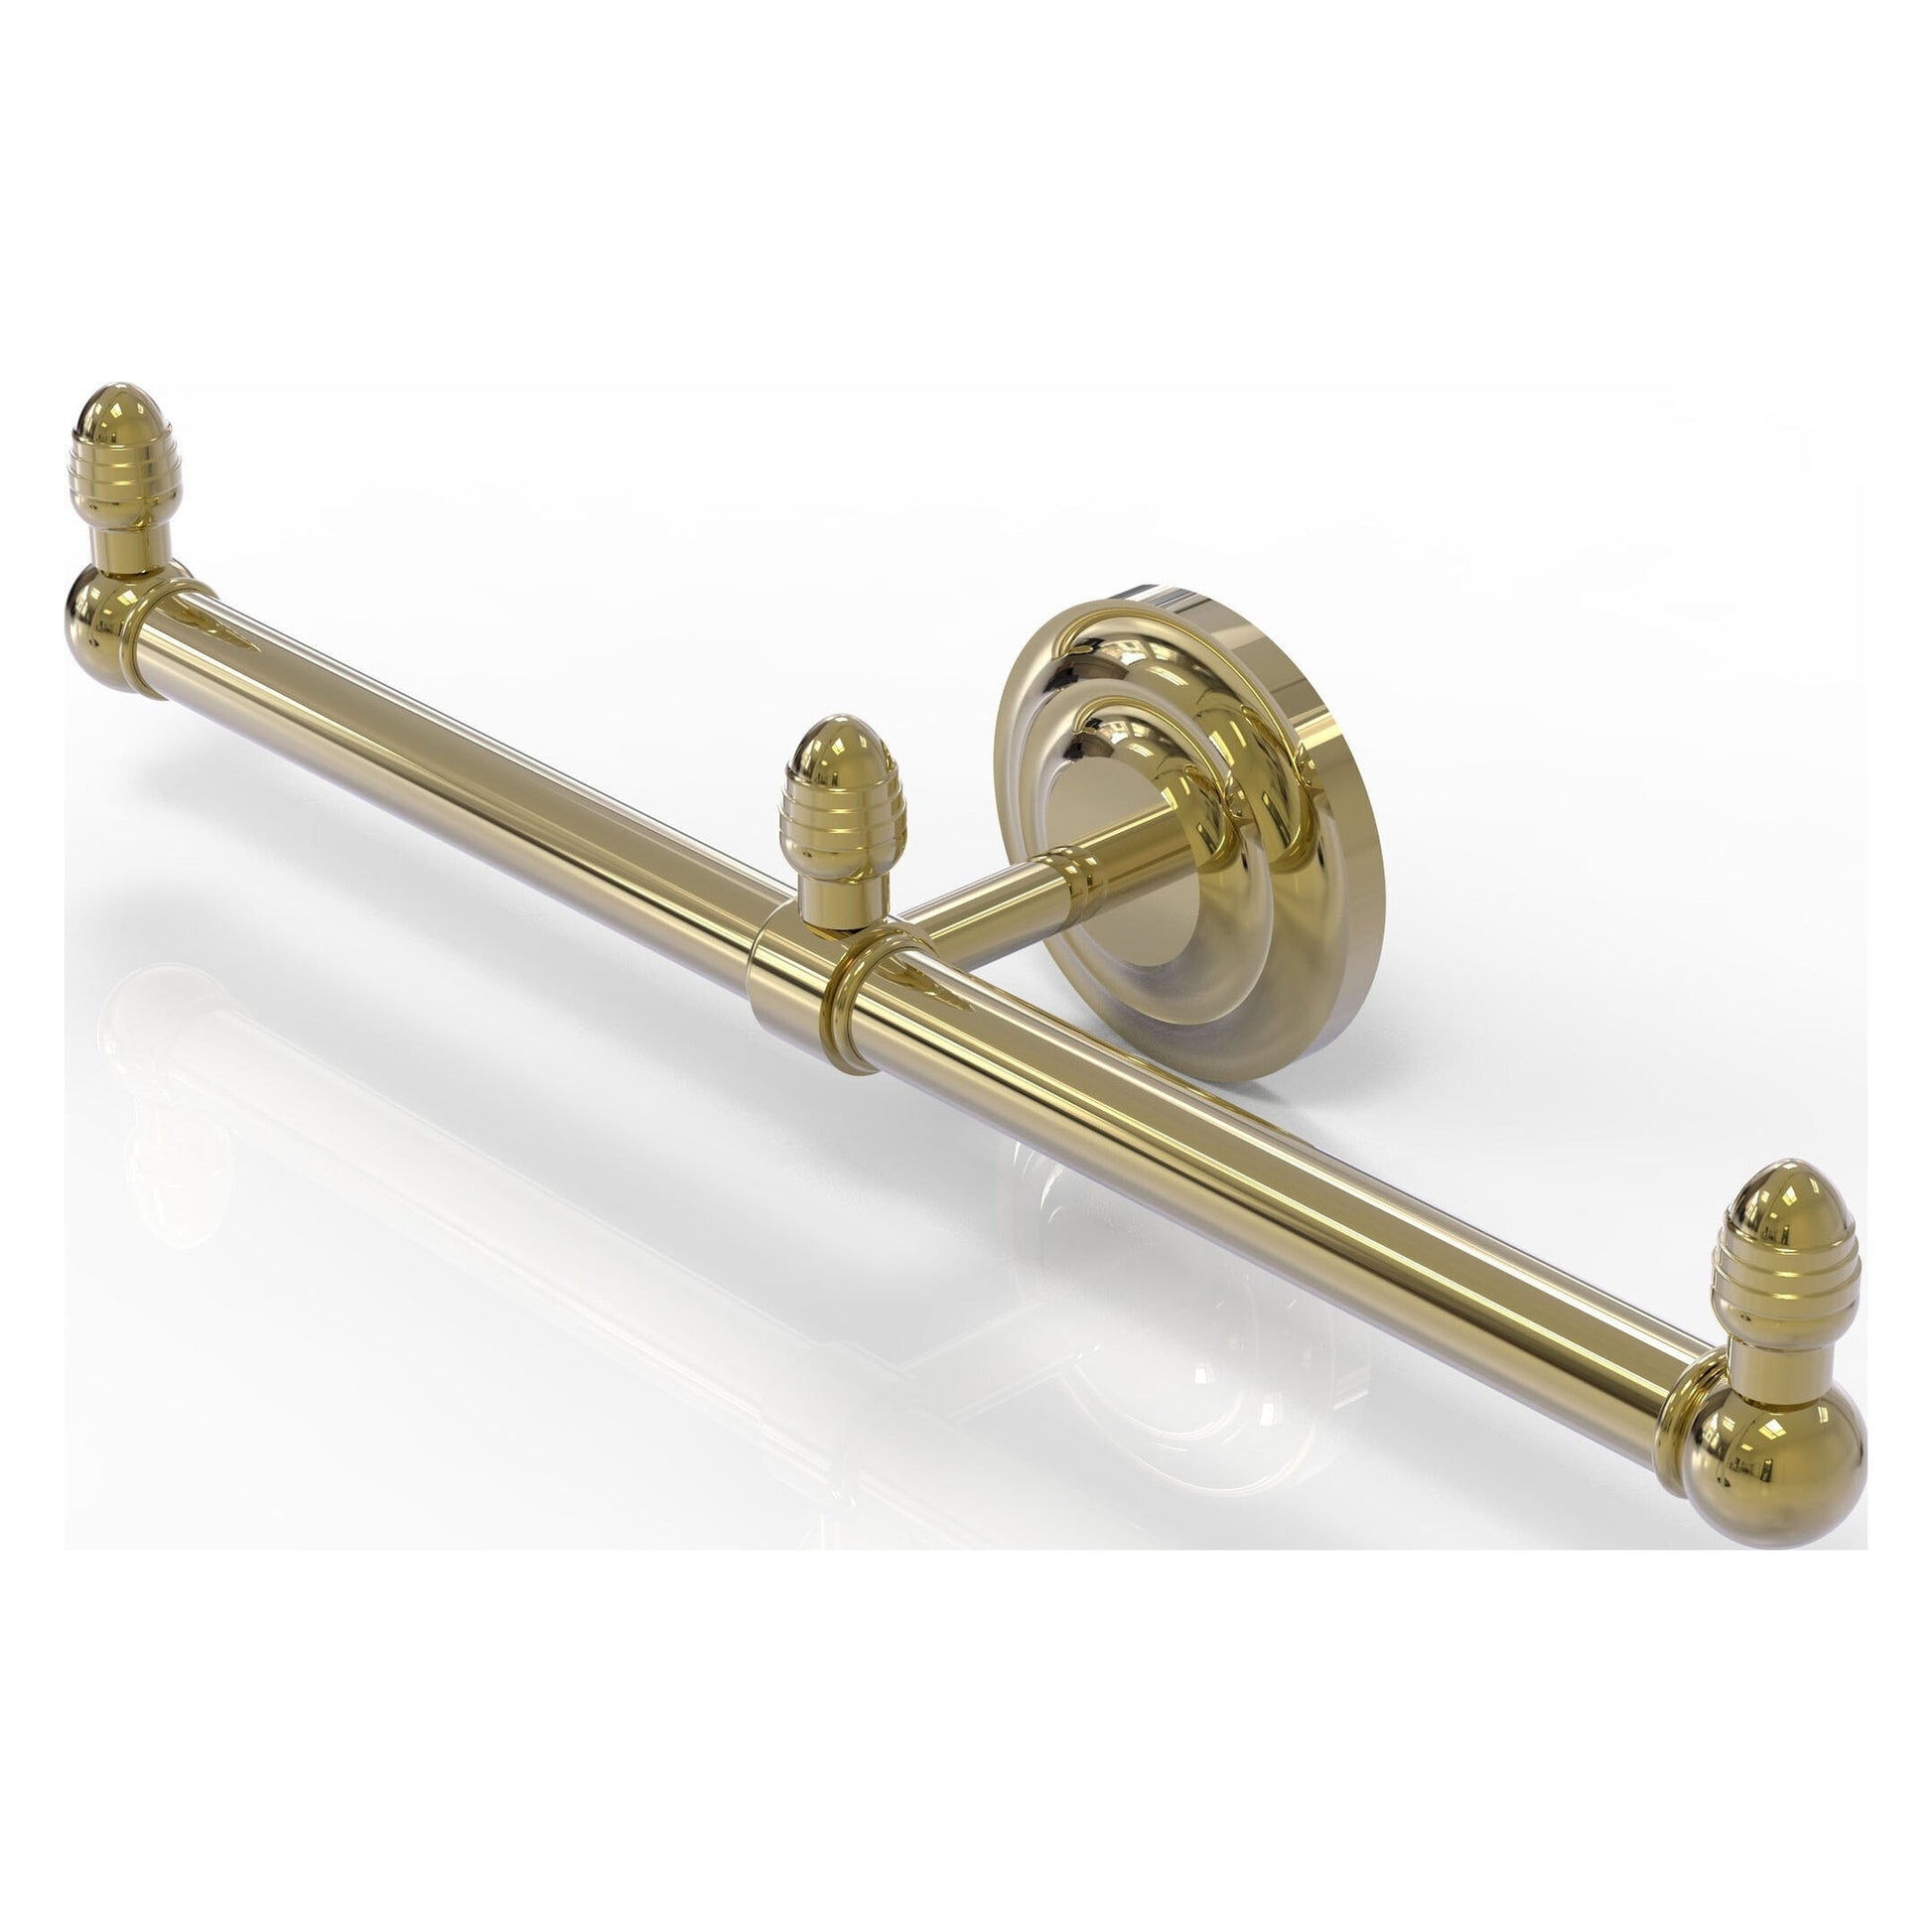 Allied Brass Que New 15.5" x 3.5" Unlacquered Brass Solid Brass 2-Arm Guest Towel Holder